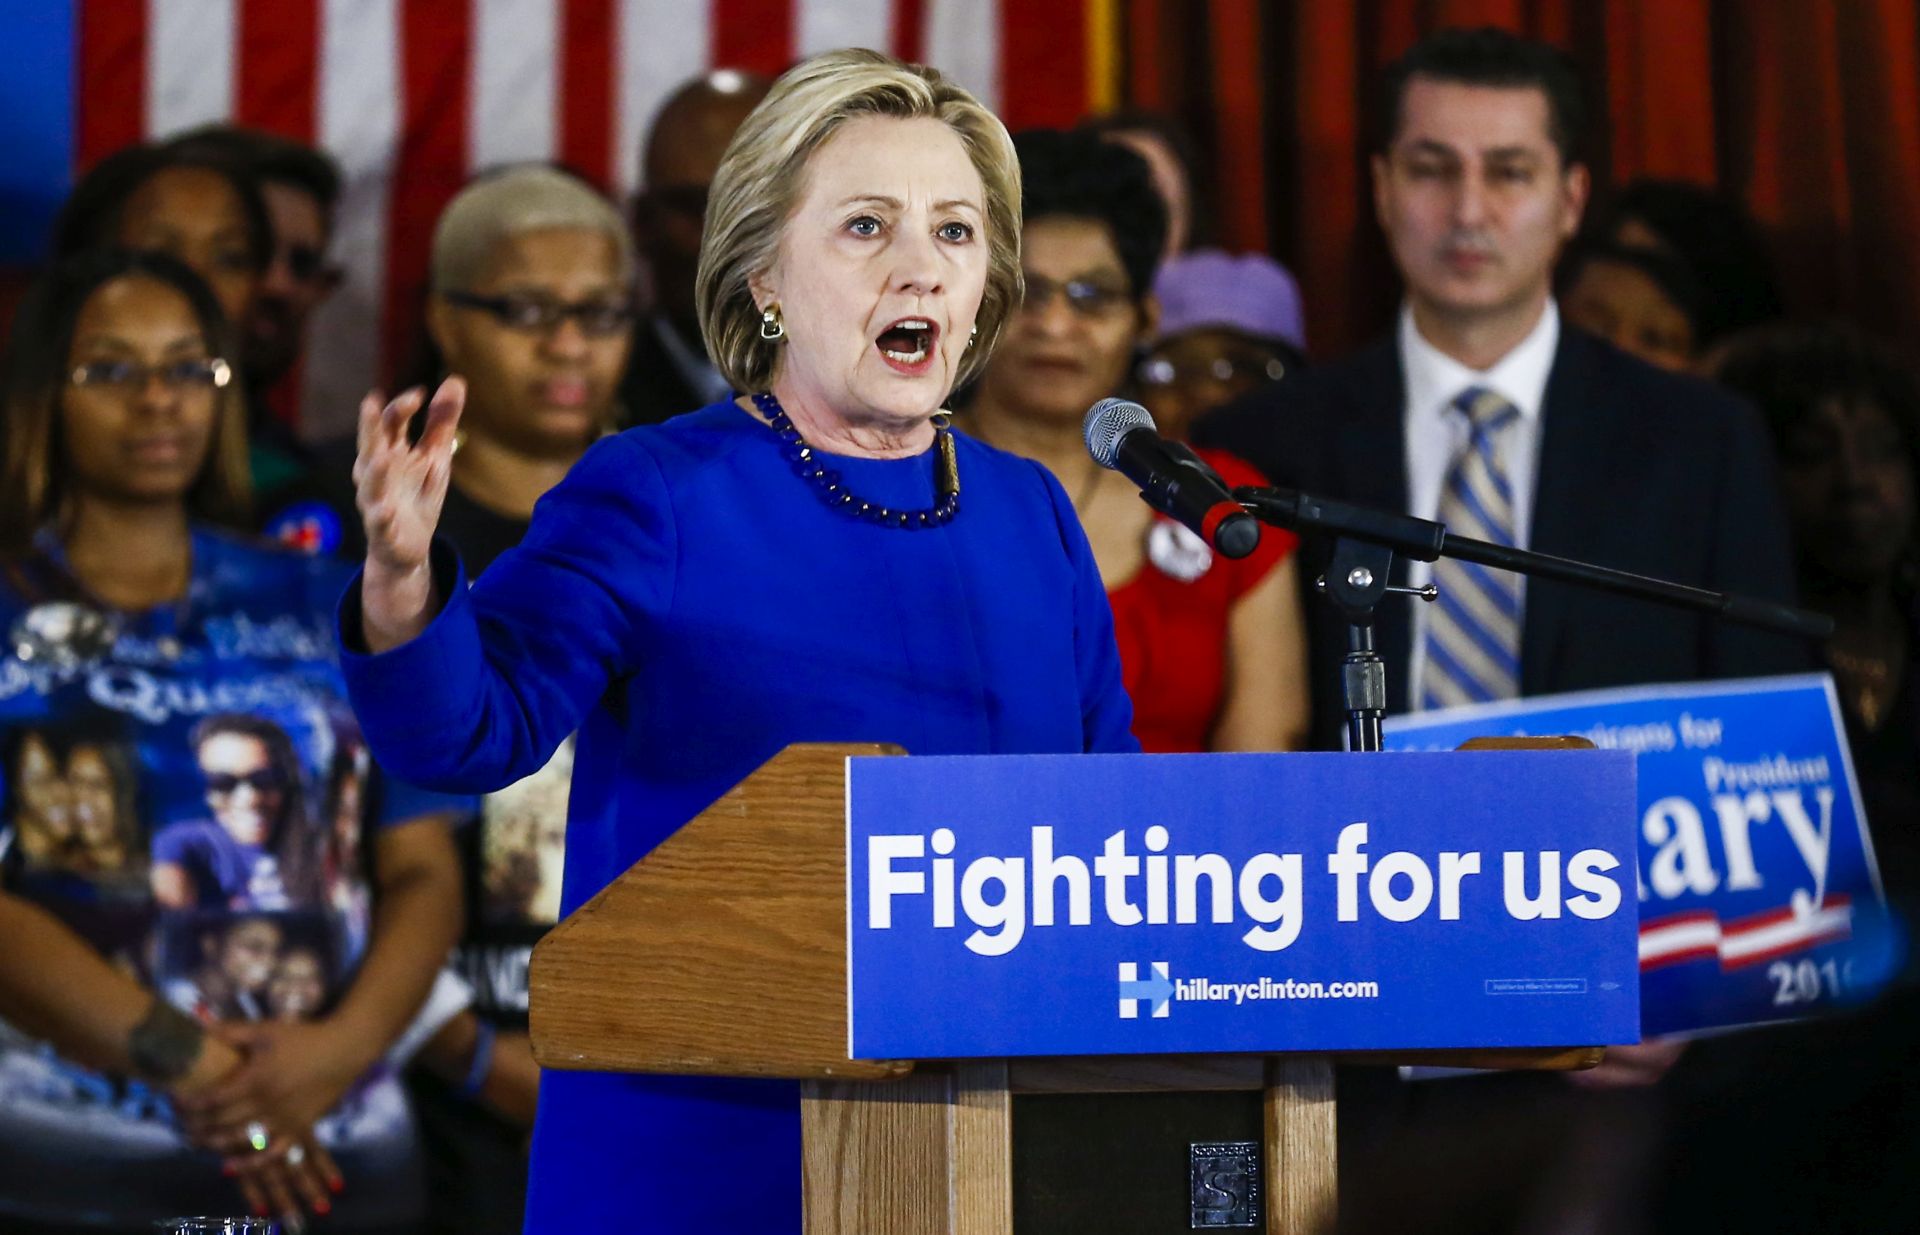 epa05166942 Democratic presidential candidate Hillary Clinton speaks at a campaign event at the Parkway Ballroom in Chicago, Illinois, USA, 17 February 2016. Clinton met with family members of people struck down by gun violence during her visit.  EPA/TANNEN MAURY